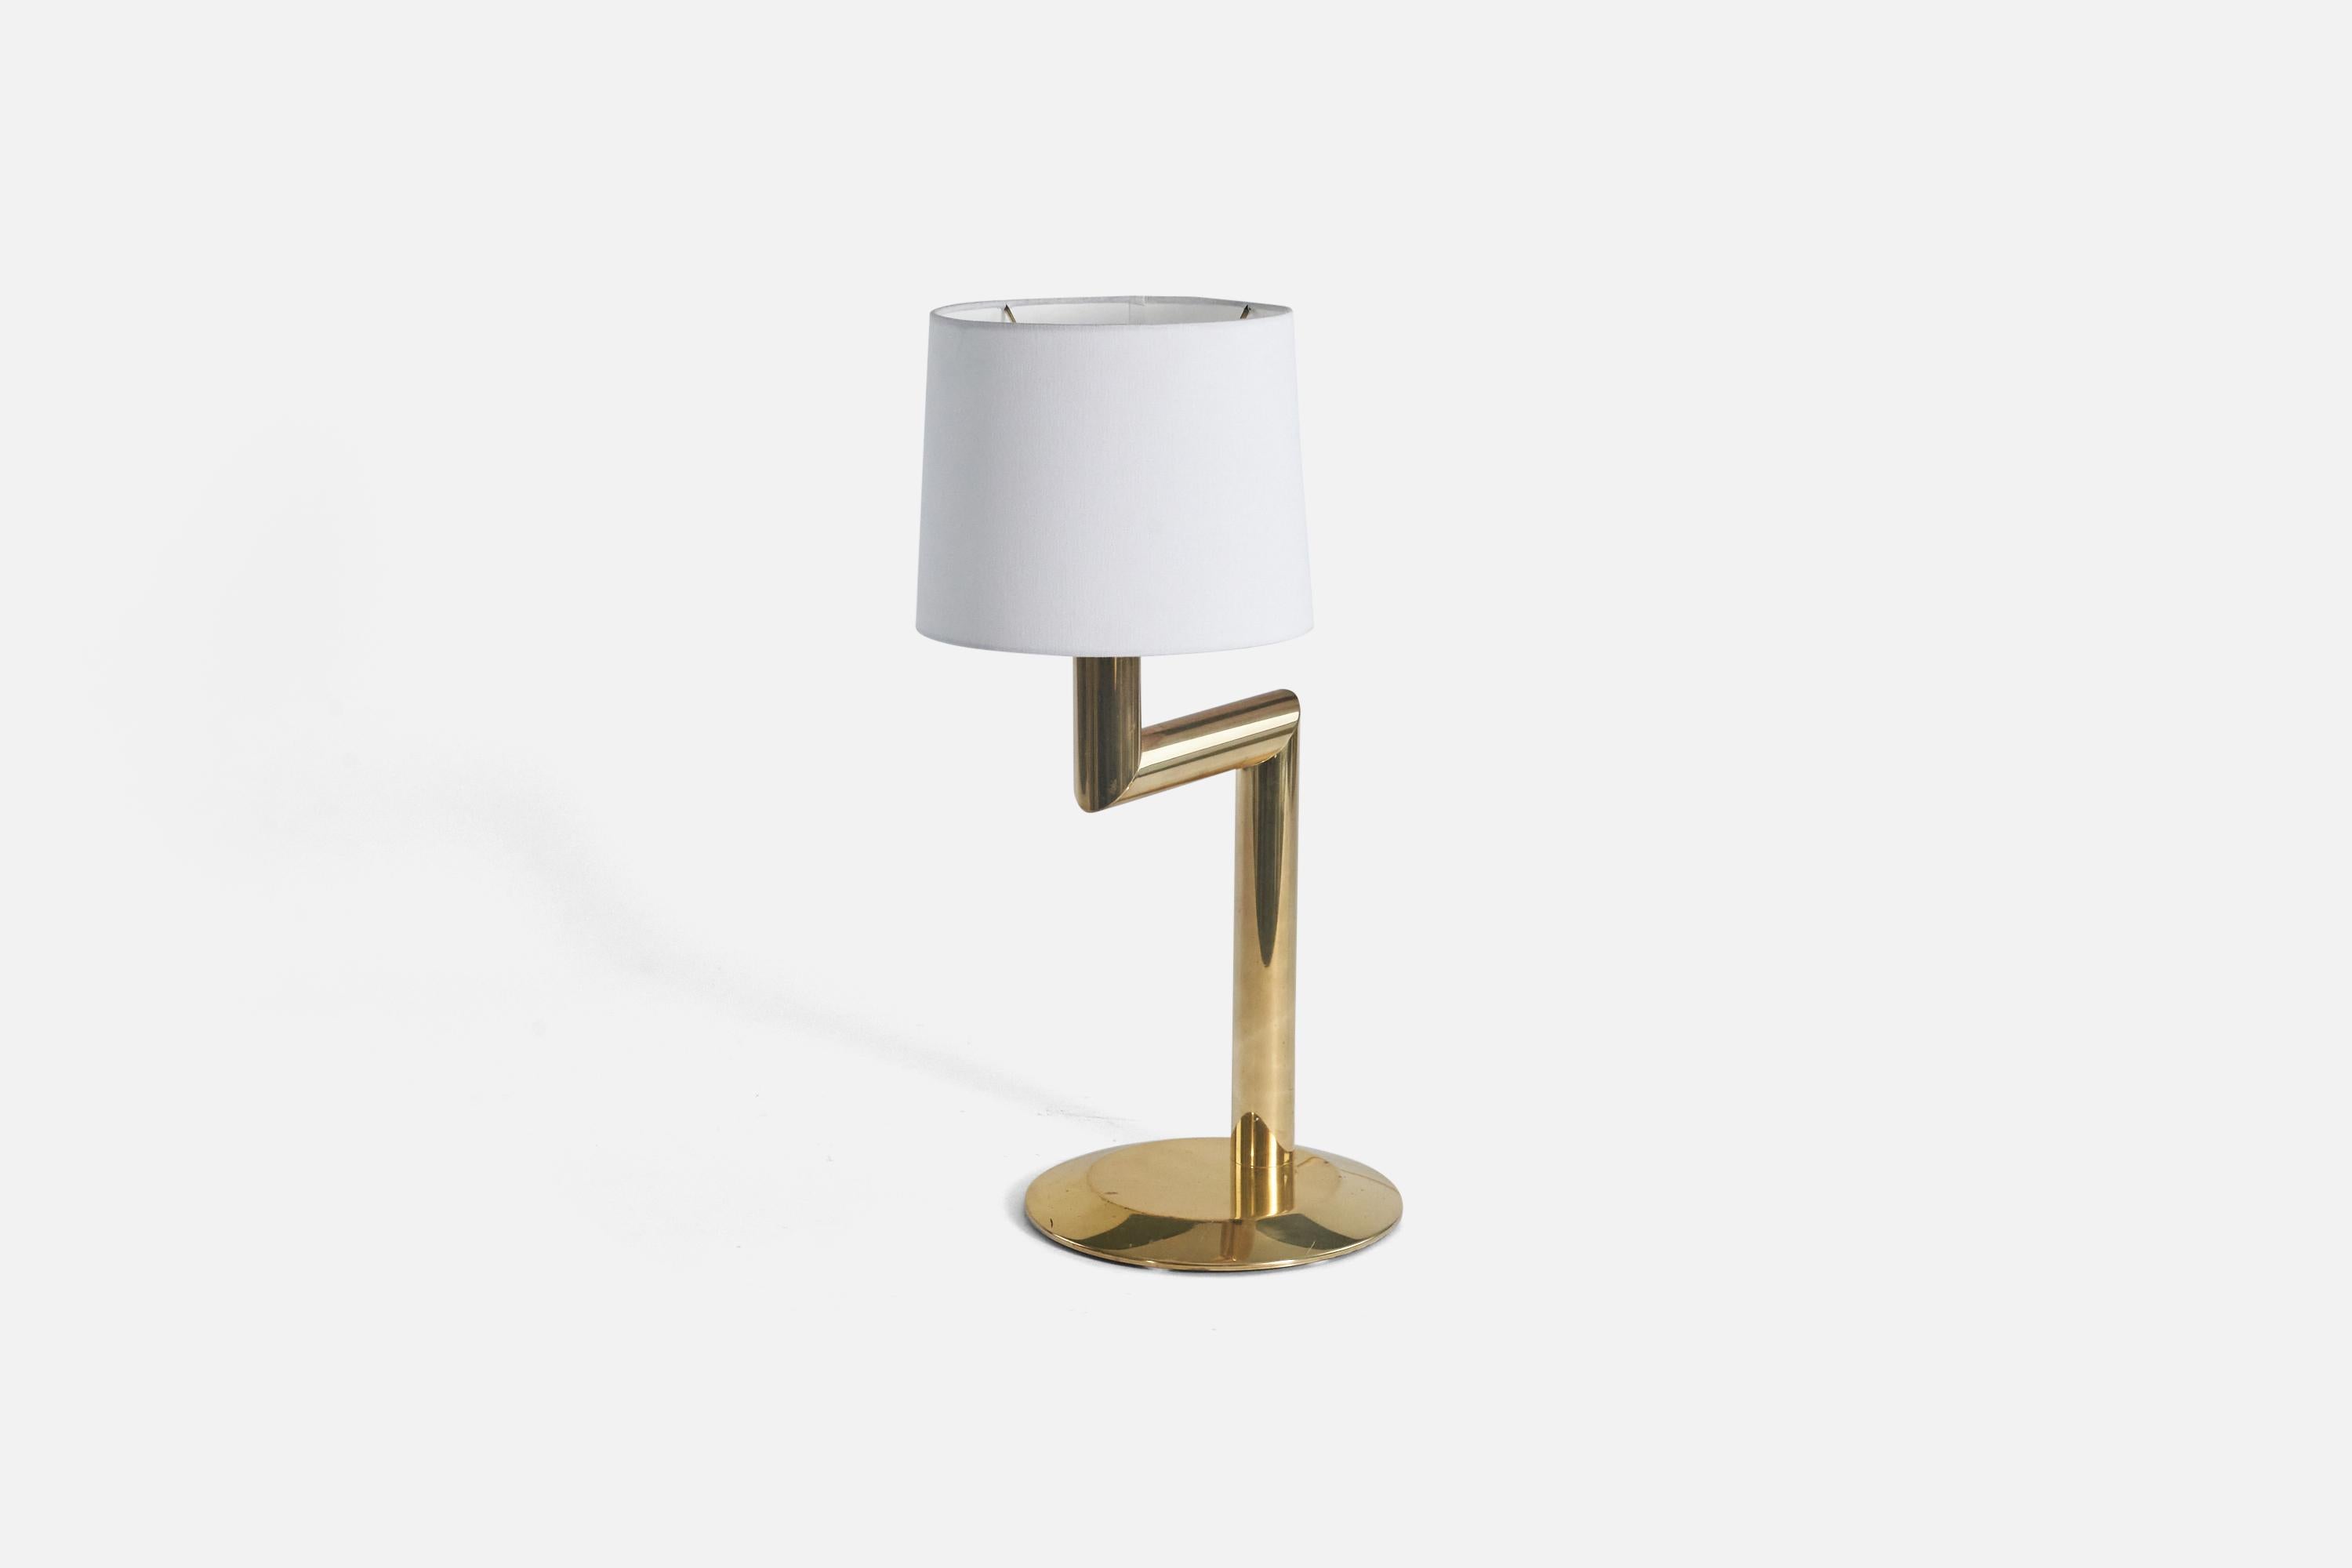 A brass table lamp designed and produced in Sweden, 1970s.

Sold without Lampshade(s)
Dimensions of Lamp (inches) : 19.18 x 10.31 x 11 (Height x Width x Depth)
Dimensions of Shade (inches) : 9 x 10 x 8 (Top Diameter x Bottom Diameter x